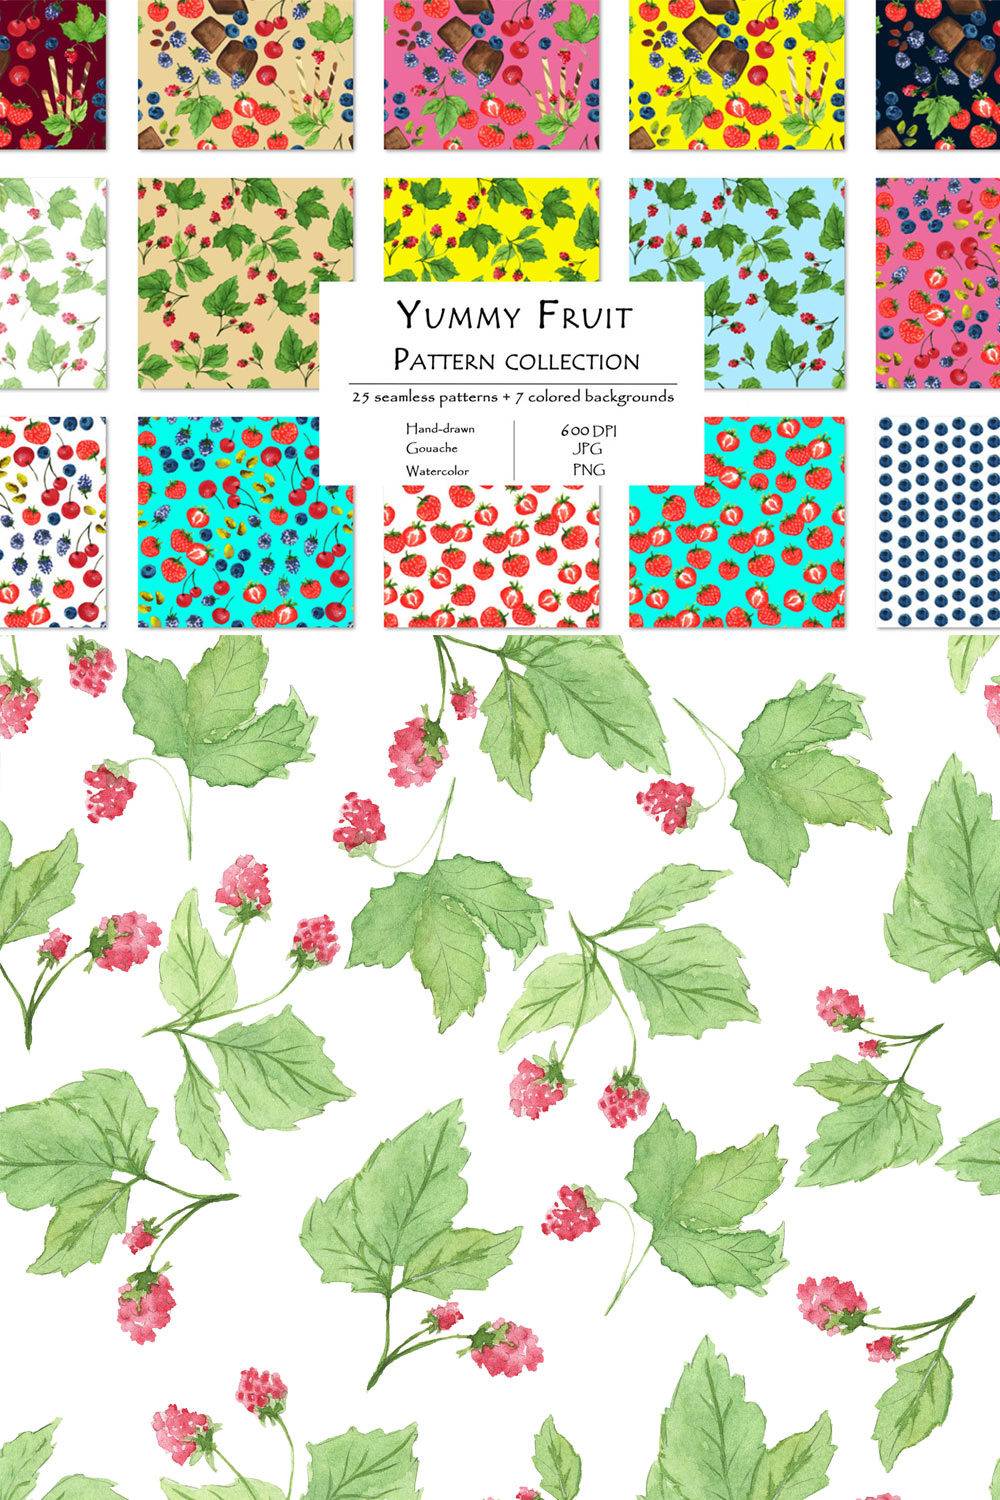 Yummy Fruit Pattern Collection With 25 Seamless Patterns And 7 Backgrounds Pinterest Image.